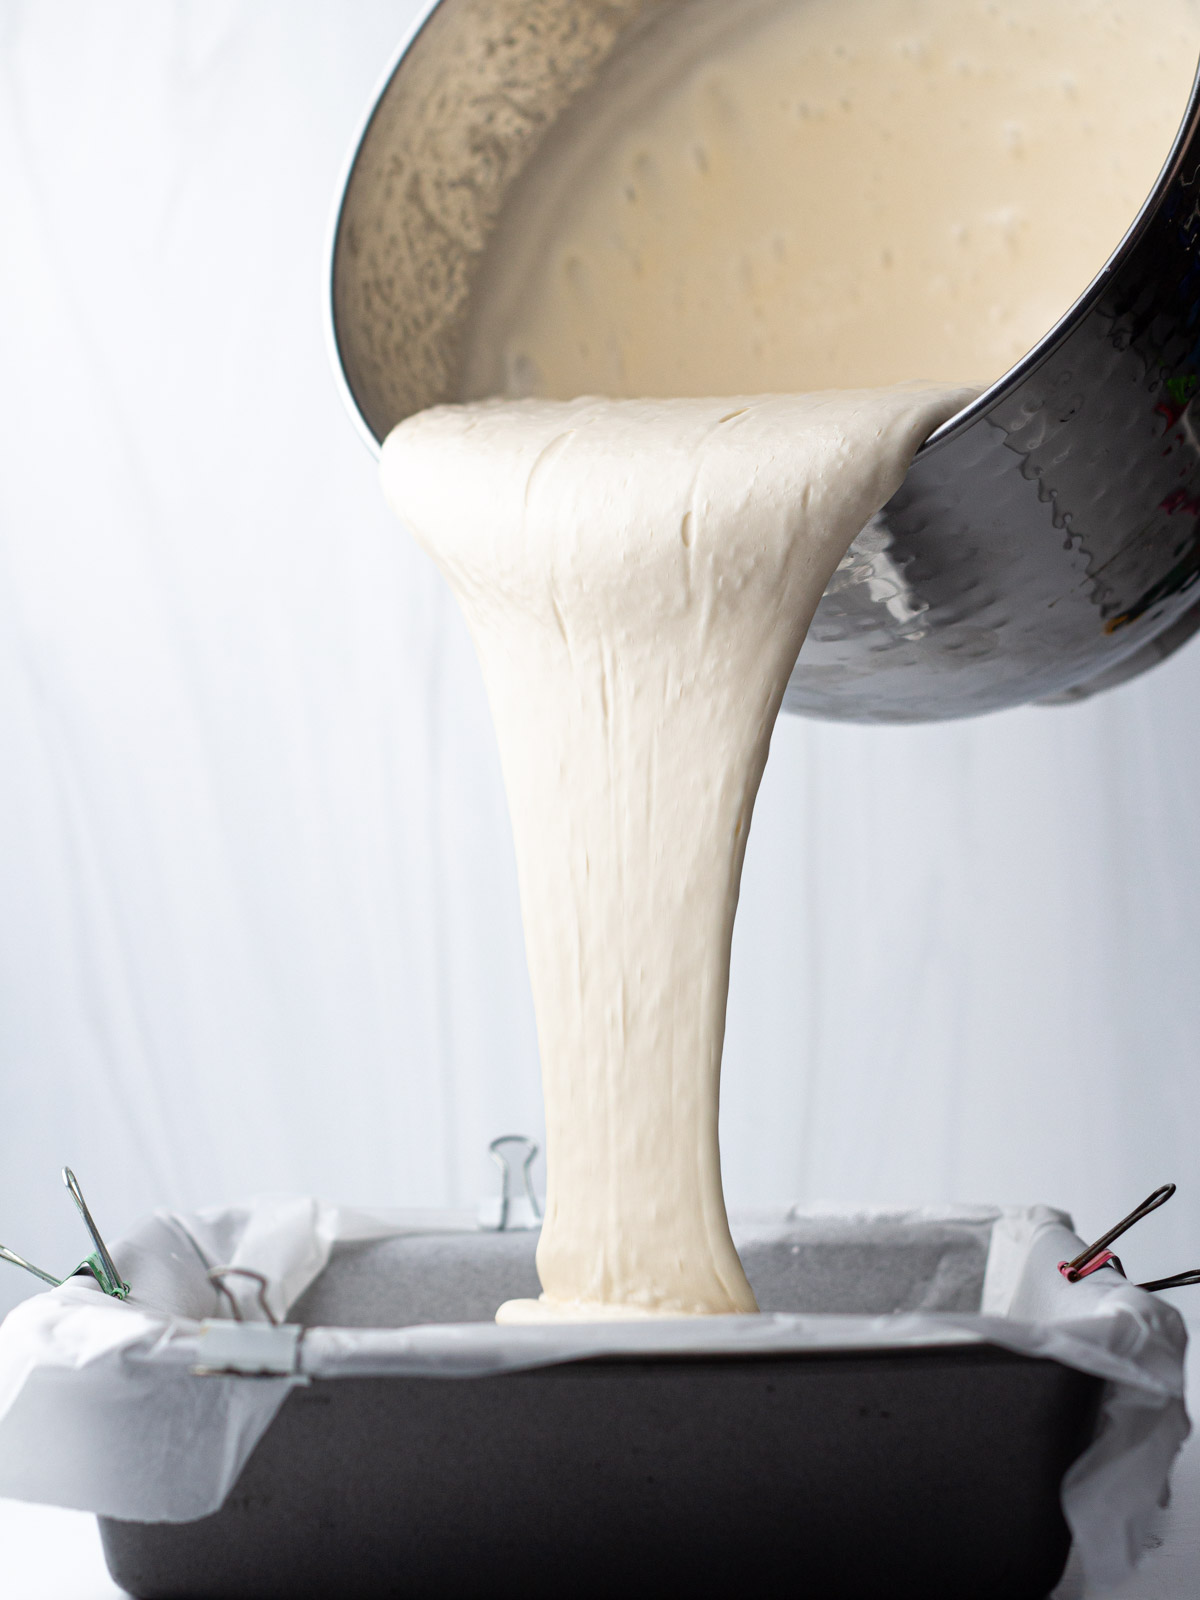 Caramel marshmallow mixture pouring from a silver mixing bowl into a parchment lined pan.